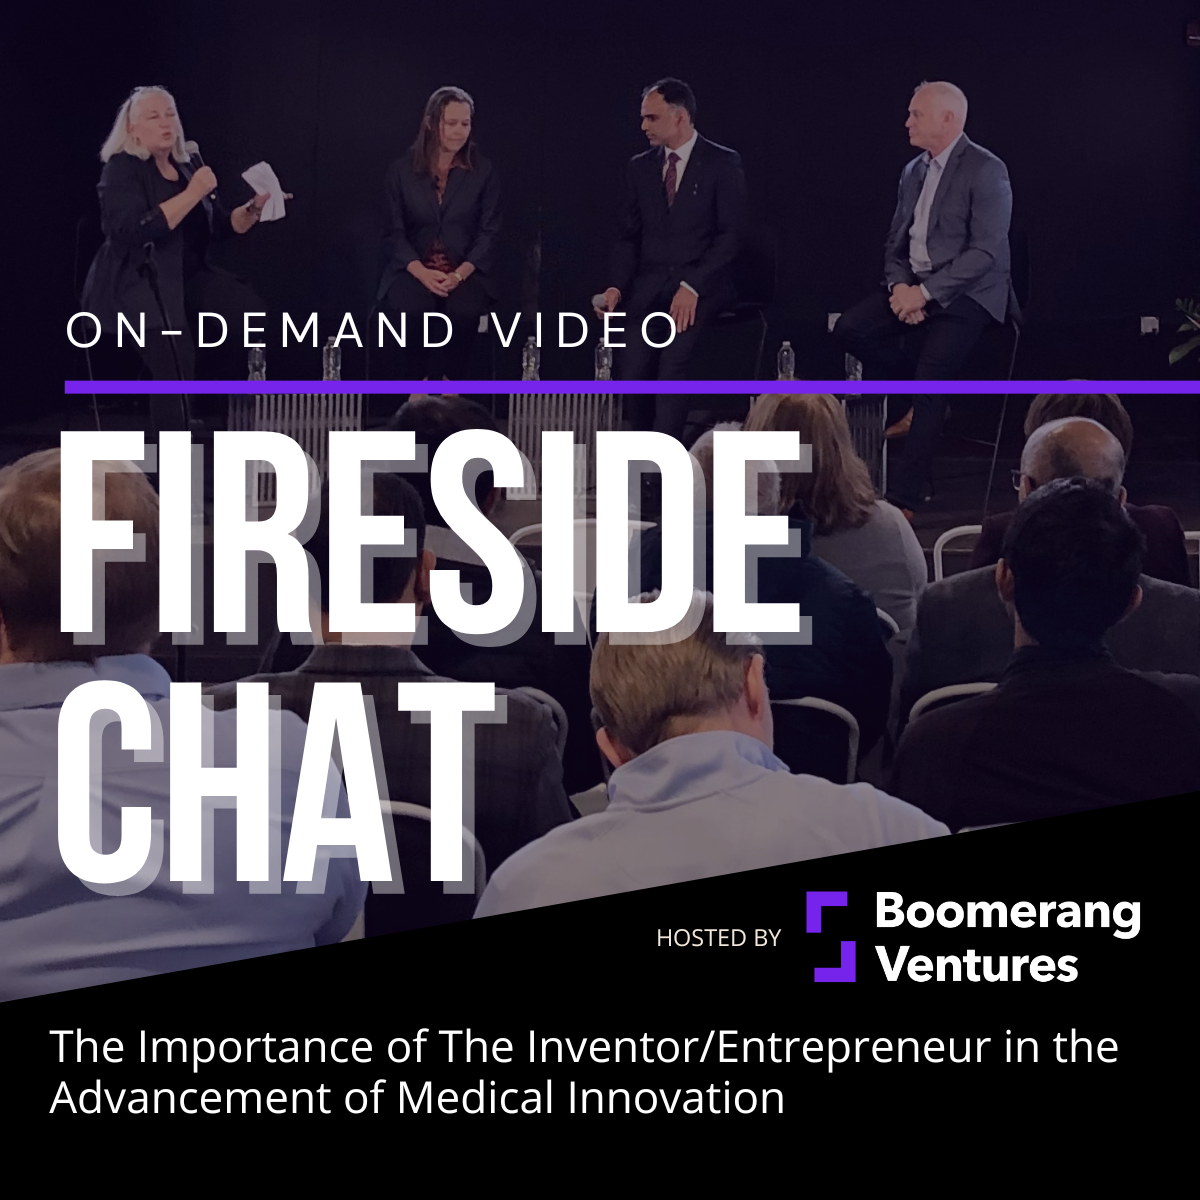 On-Demand Video | Fireside Chat: The Importance of The Inventor/Entrepreneur in the Advancement of Medical Innovation